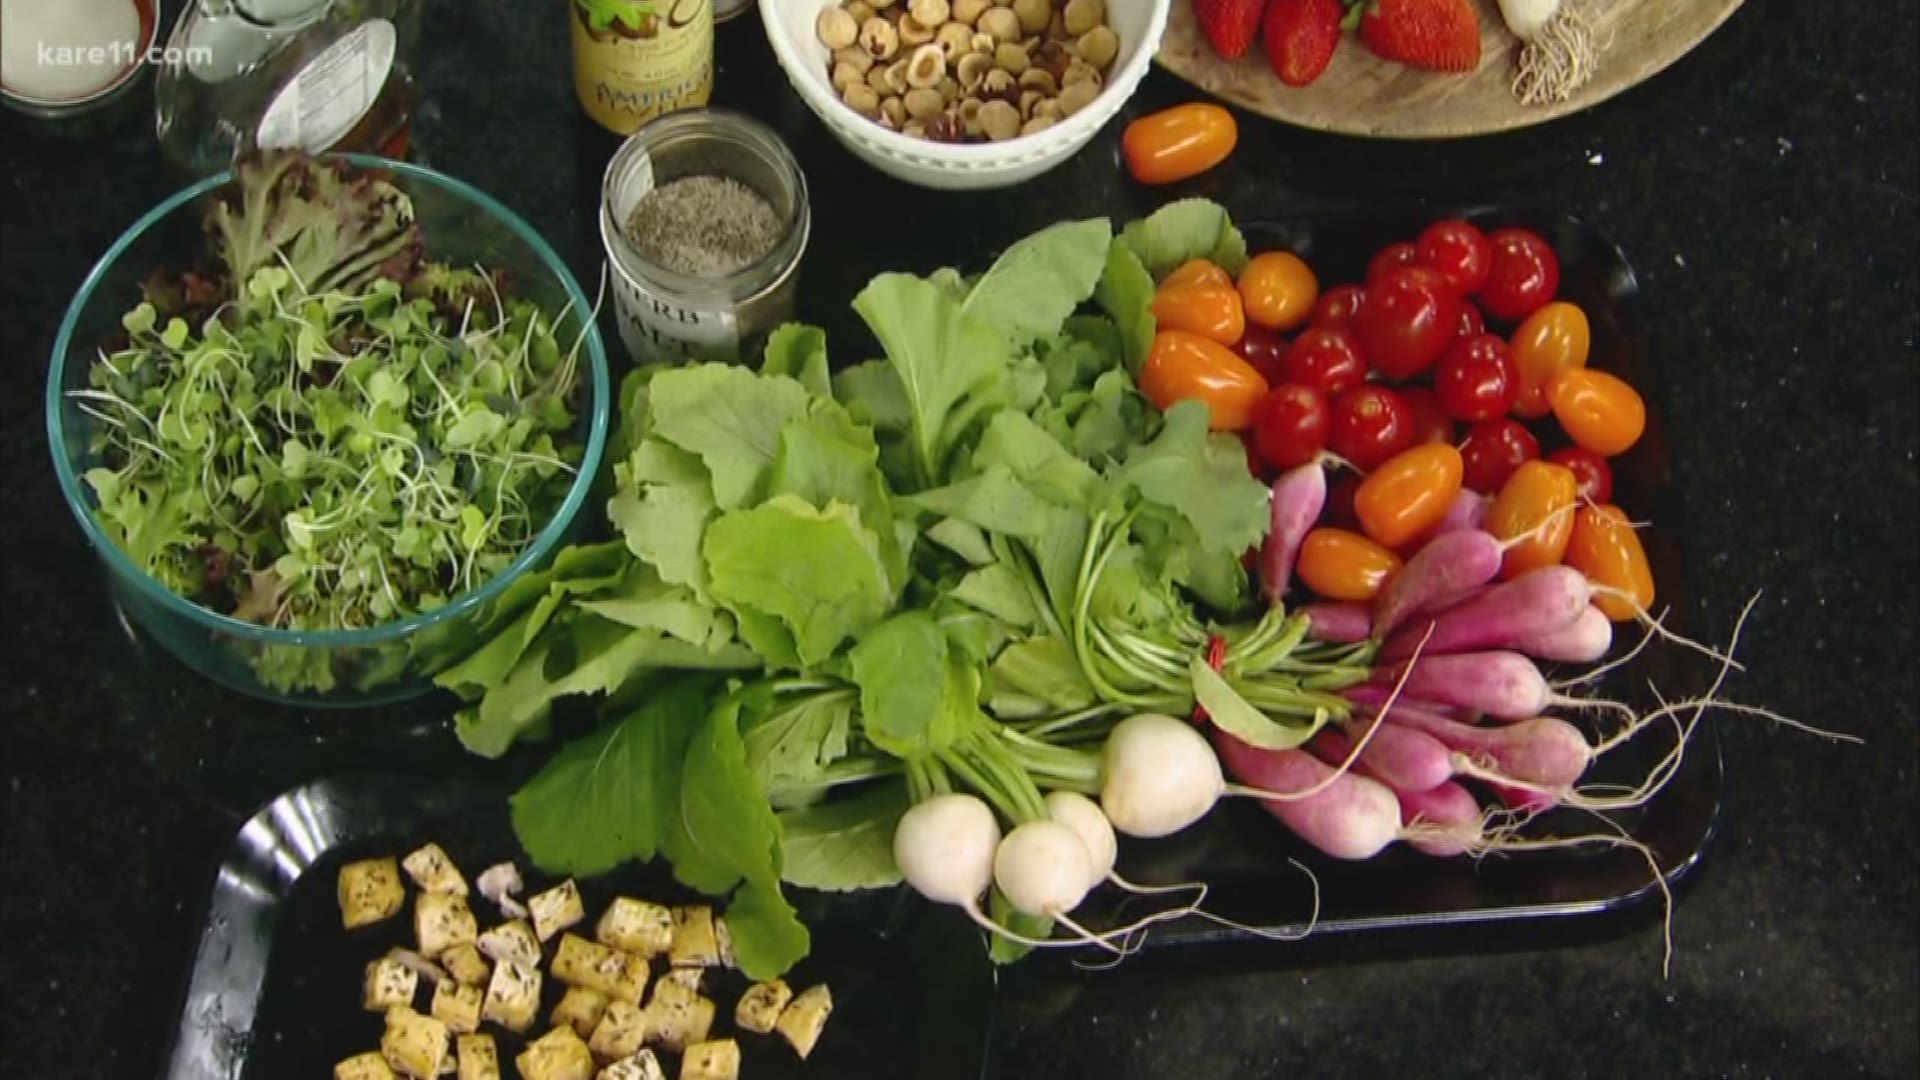 We don't know how she does it, but recent James Beard Award-winning chef and author Beth Dooley has found the time to create some fresh summer salads. https://kare11.tv/2MkpxBB